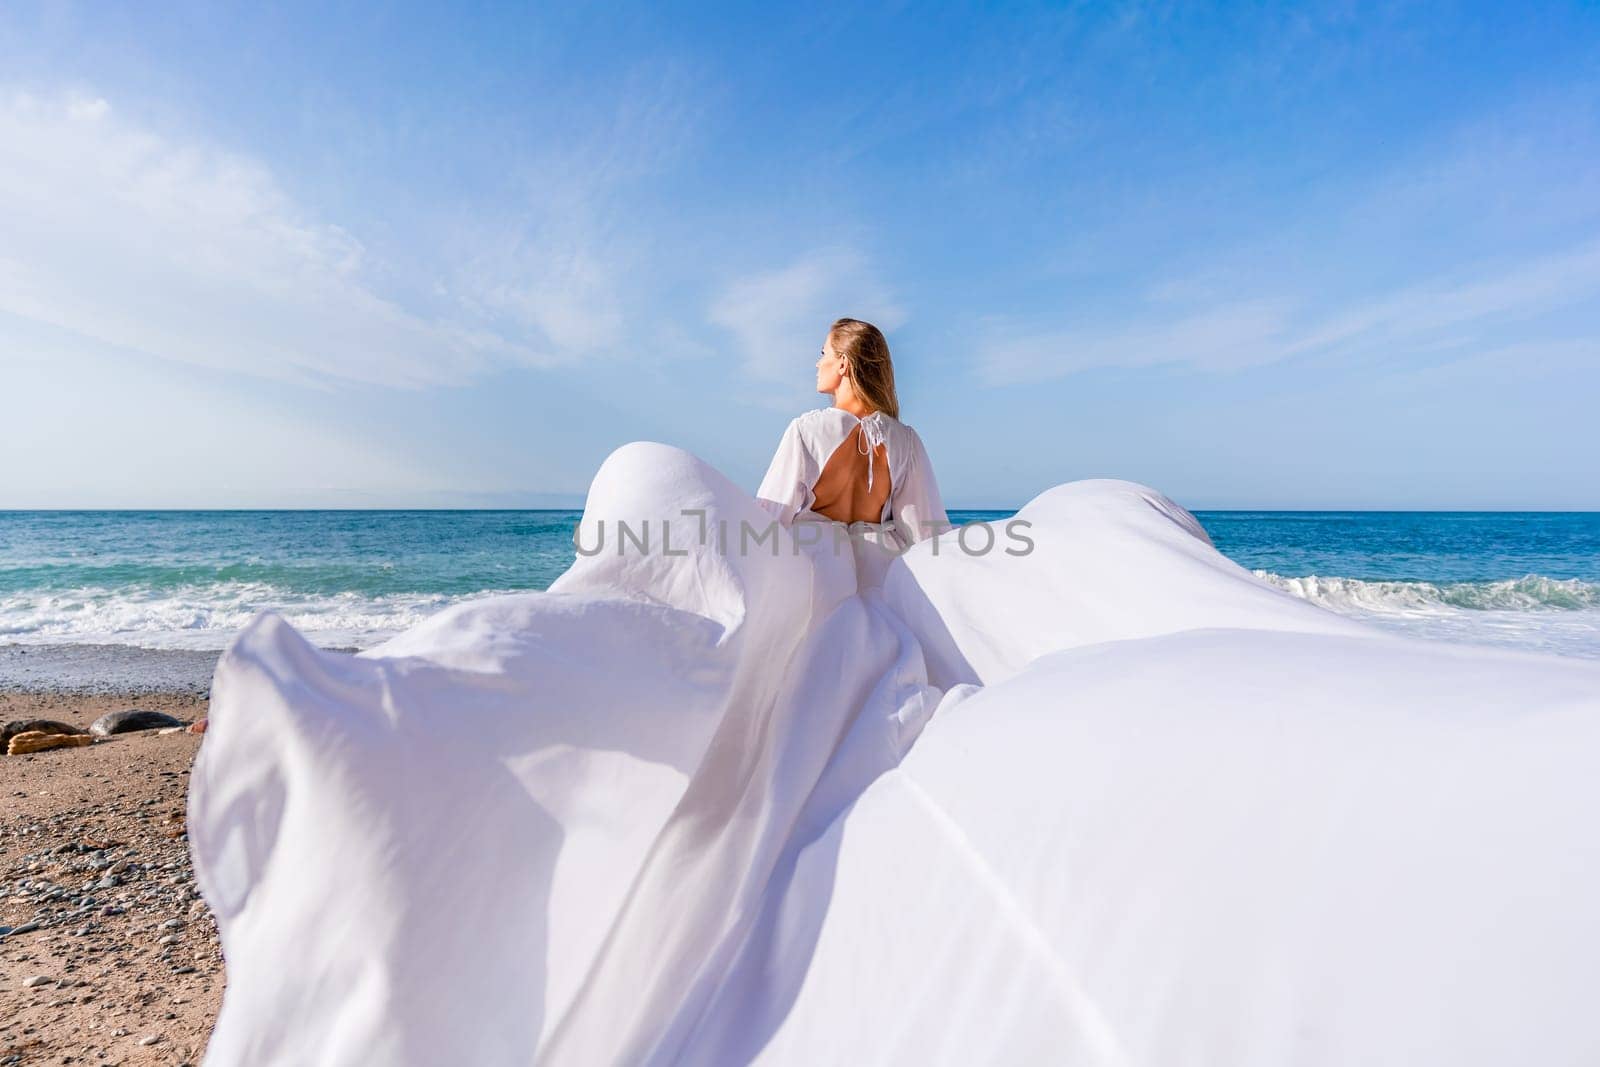 Woman beach white dress flying on Wind. Summer Vacation. A happy woman takes vacation photos to send to friends. by Matiunina